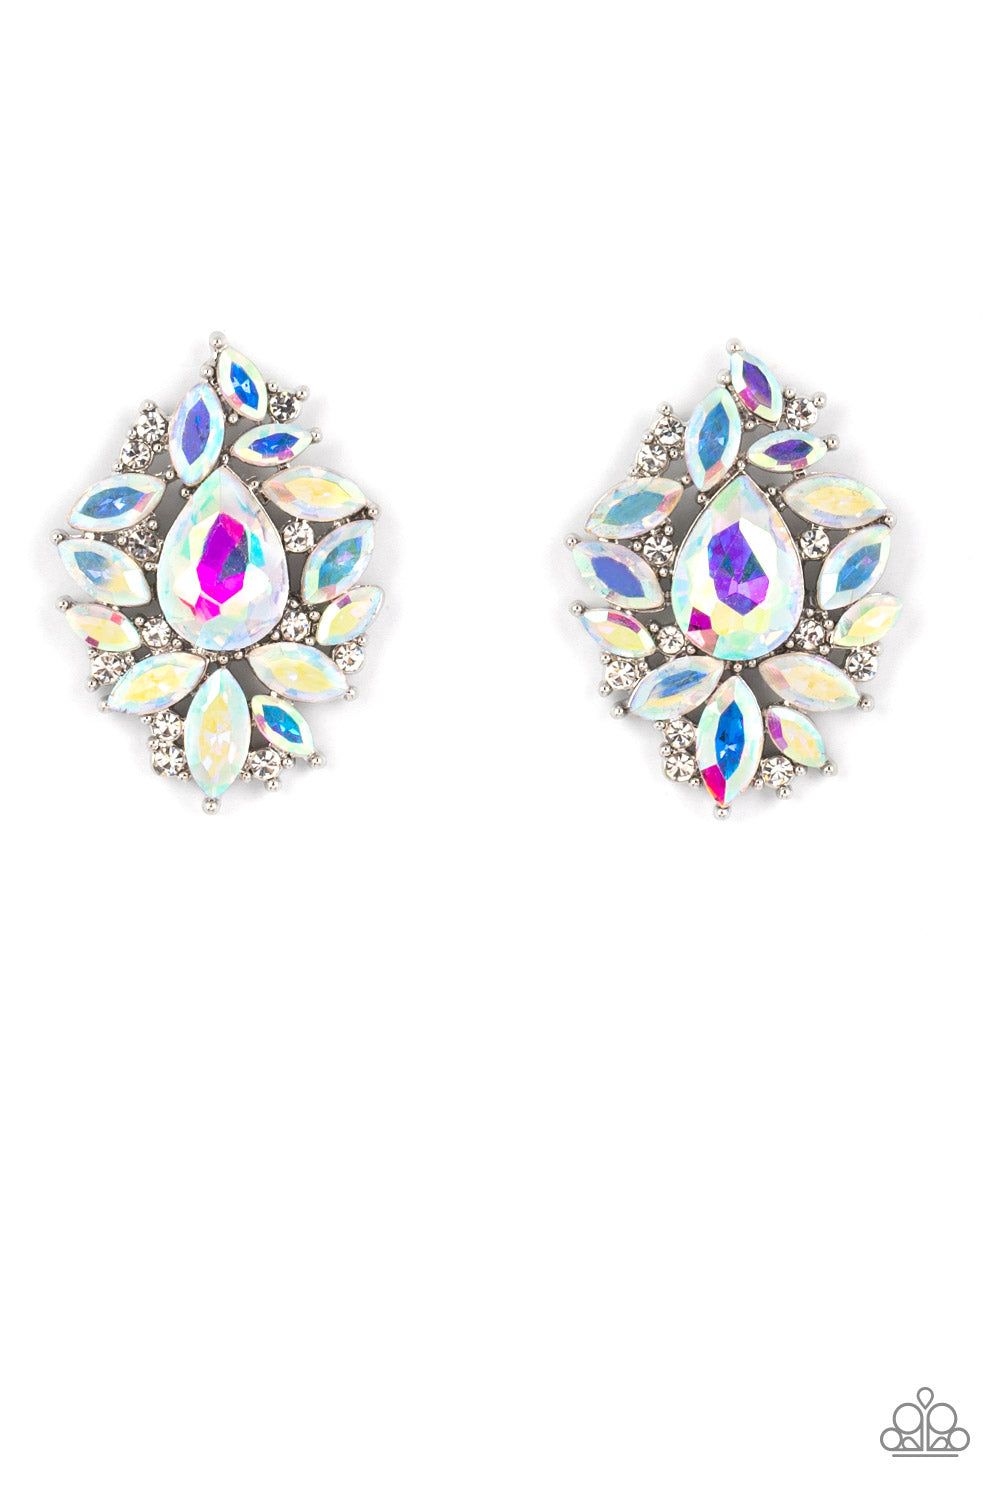 We All Scream for Ice QUEEN Multi Earring - Paparazzi Accessories  Crackling with icy incandescence, a sparkly collection of round white and marquise cut iridescent rhinestones scatters from an oversized iridescent teardrop gem for a jaw-dropping dazzle. Due to its prismatic palette, color may vary. Earring attaches to a standard post fitting.  Sold as one pair of post earrings.